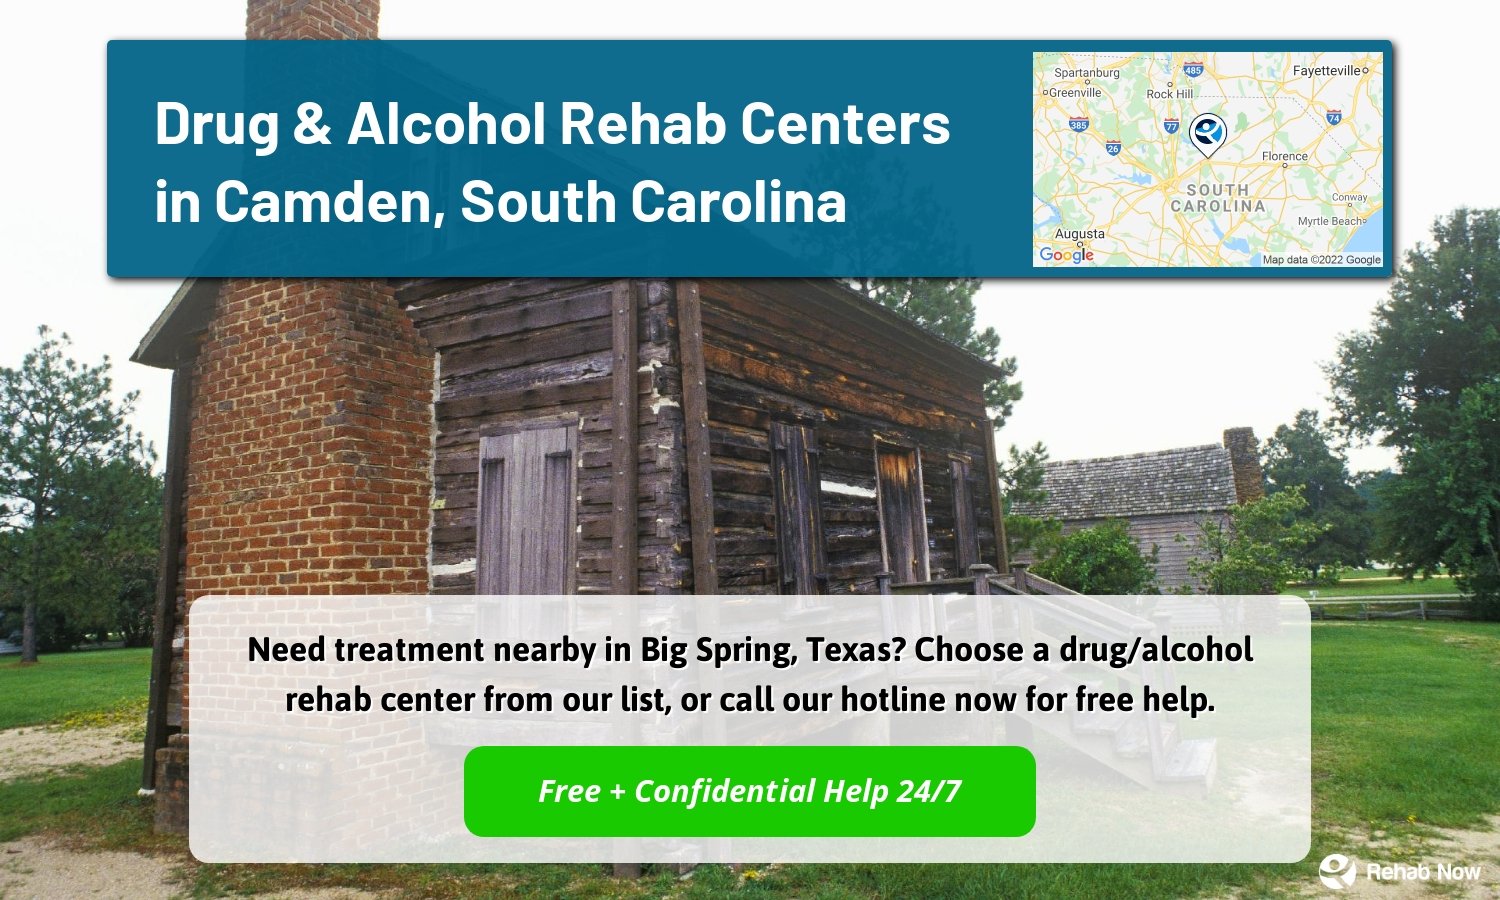 Need treatment nearby in Big Spring, Texas? Choose a drug/alcohol rehab center from our list, or call our hotline now for free help.